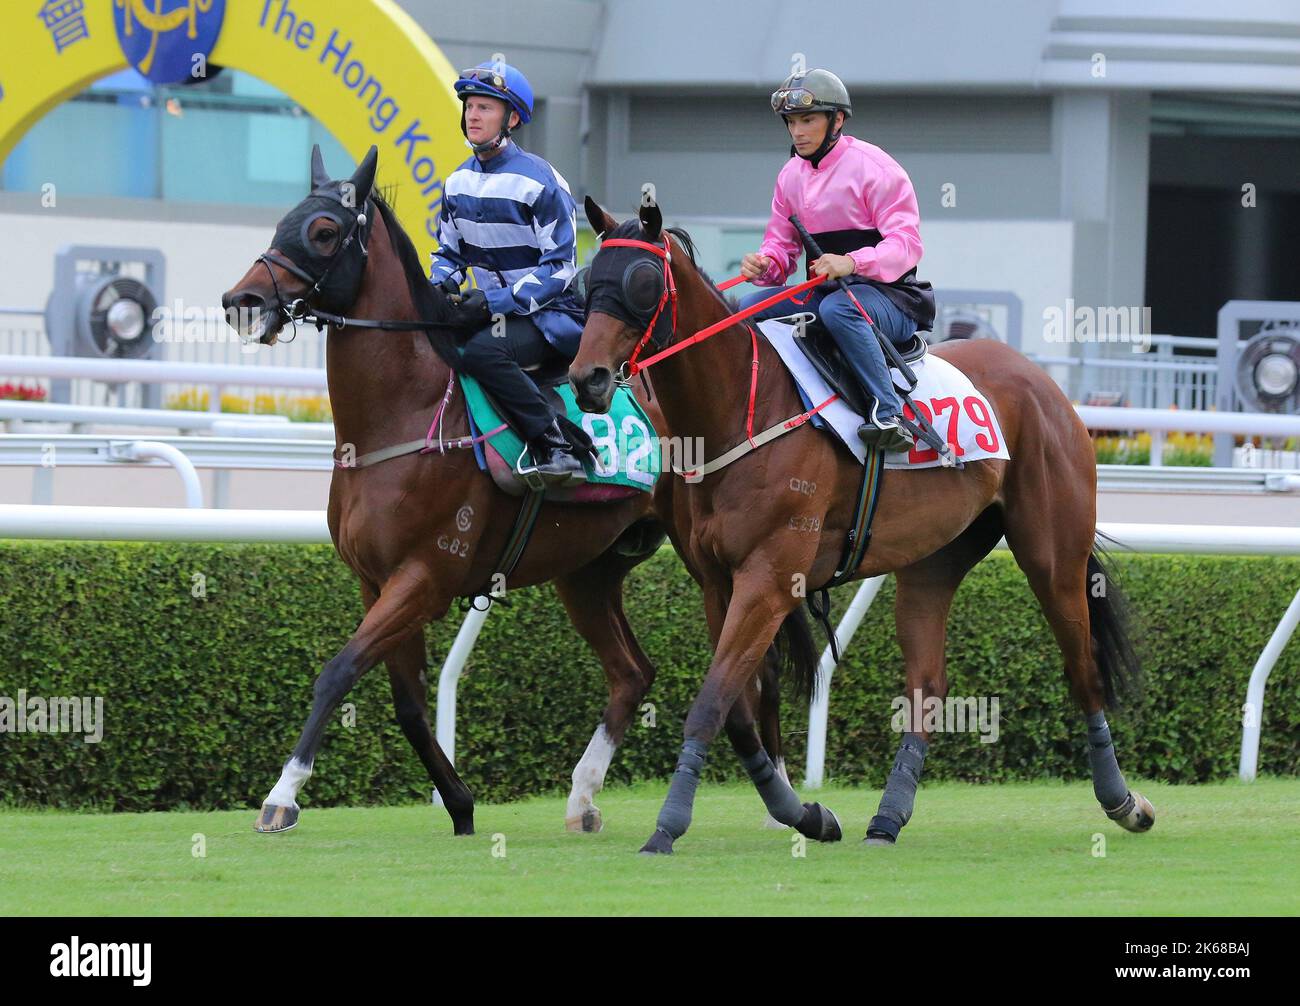 BEAUTY FIT(279) ridden by Alexis Badel and THE IRISHMAN(82) ridden by Zac Purton trial in batch 2 over 1000Metres (Turf) at Sha Tin. 27SEP22 SCMP / Kenneth Chan. Stock Photo